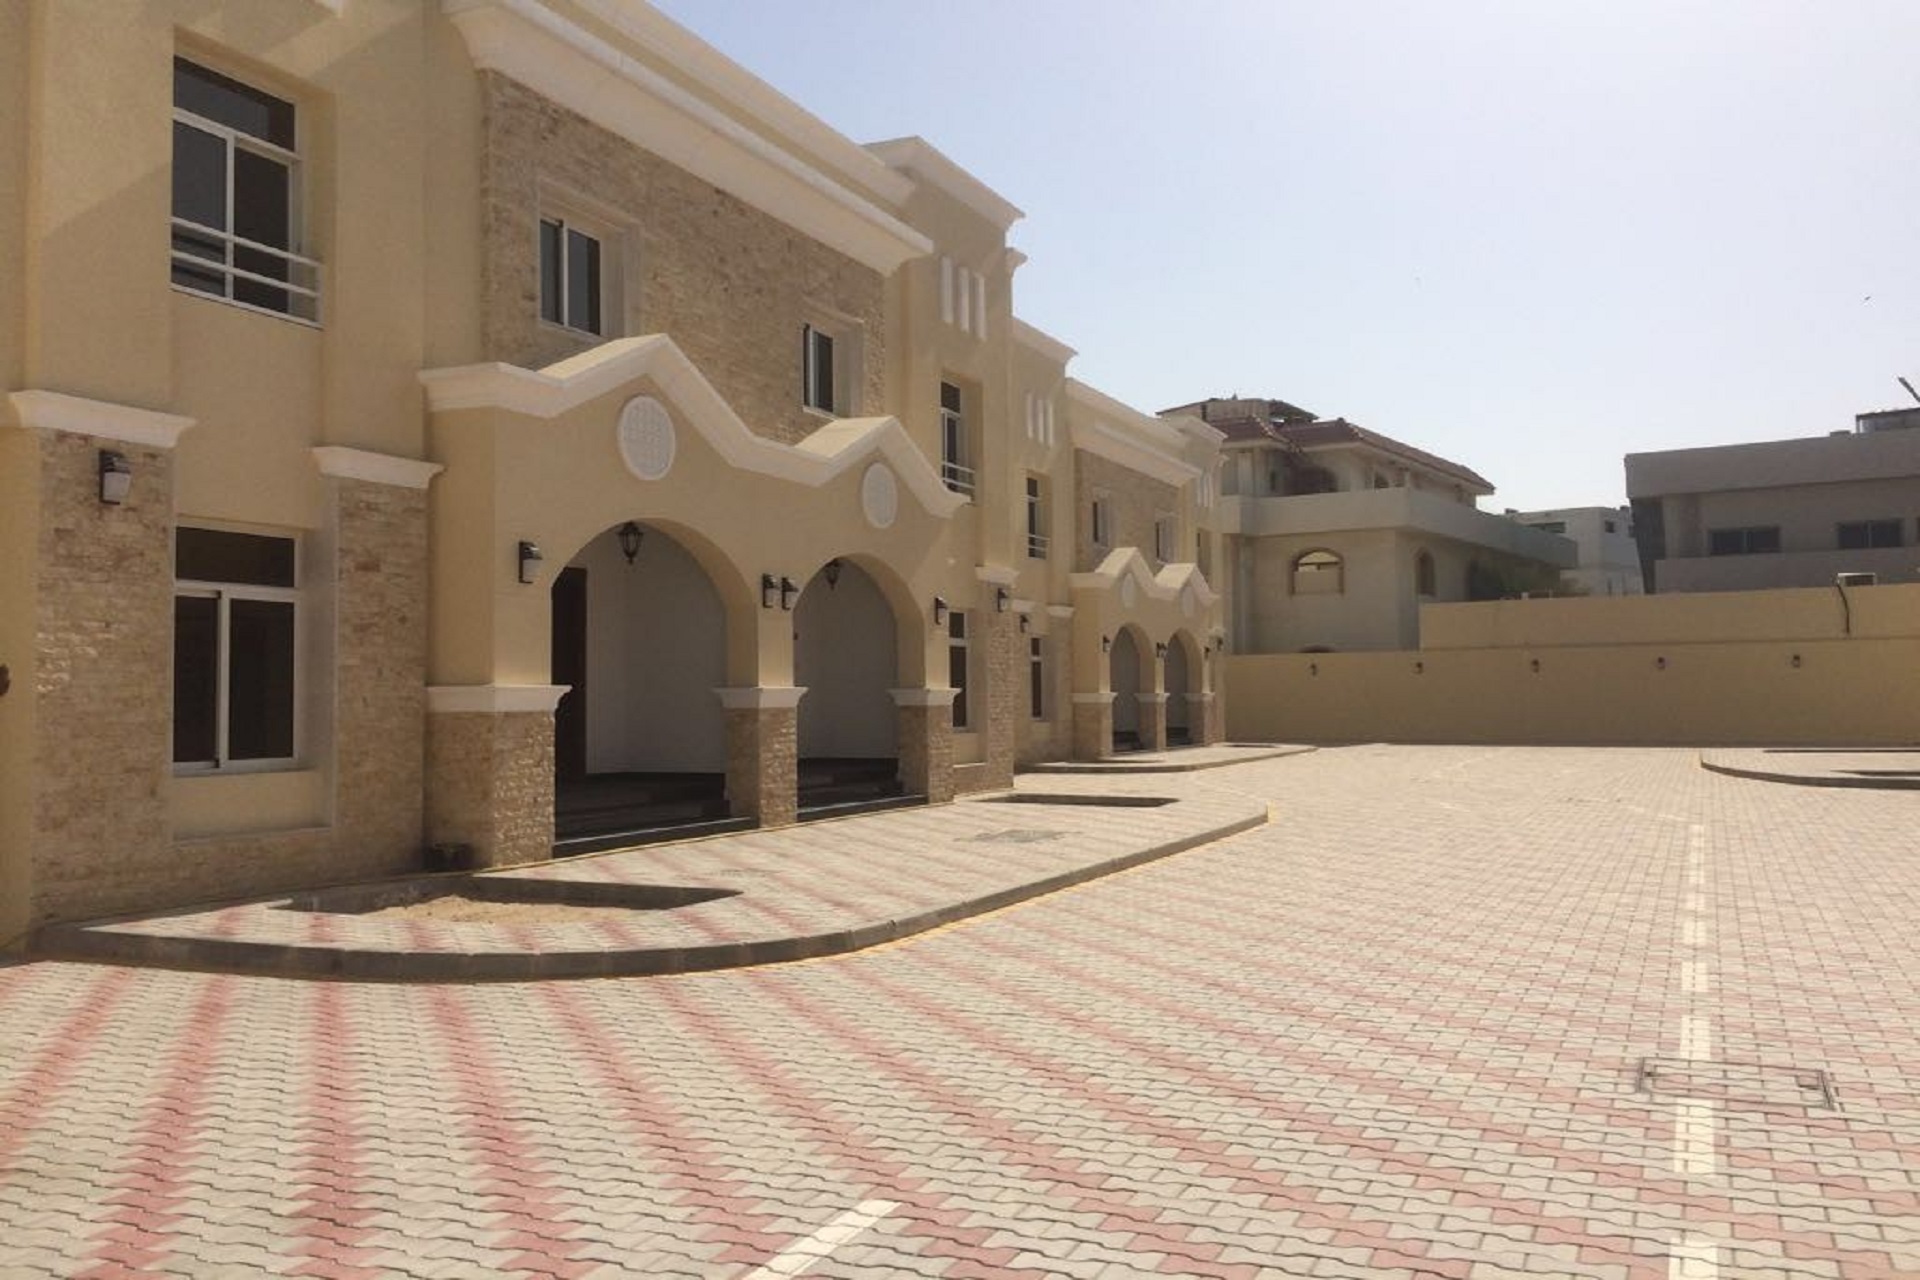 6 bedrooms compound villas in Hilal